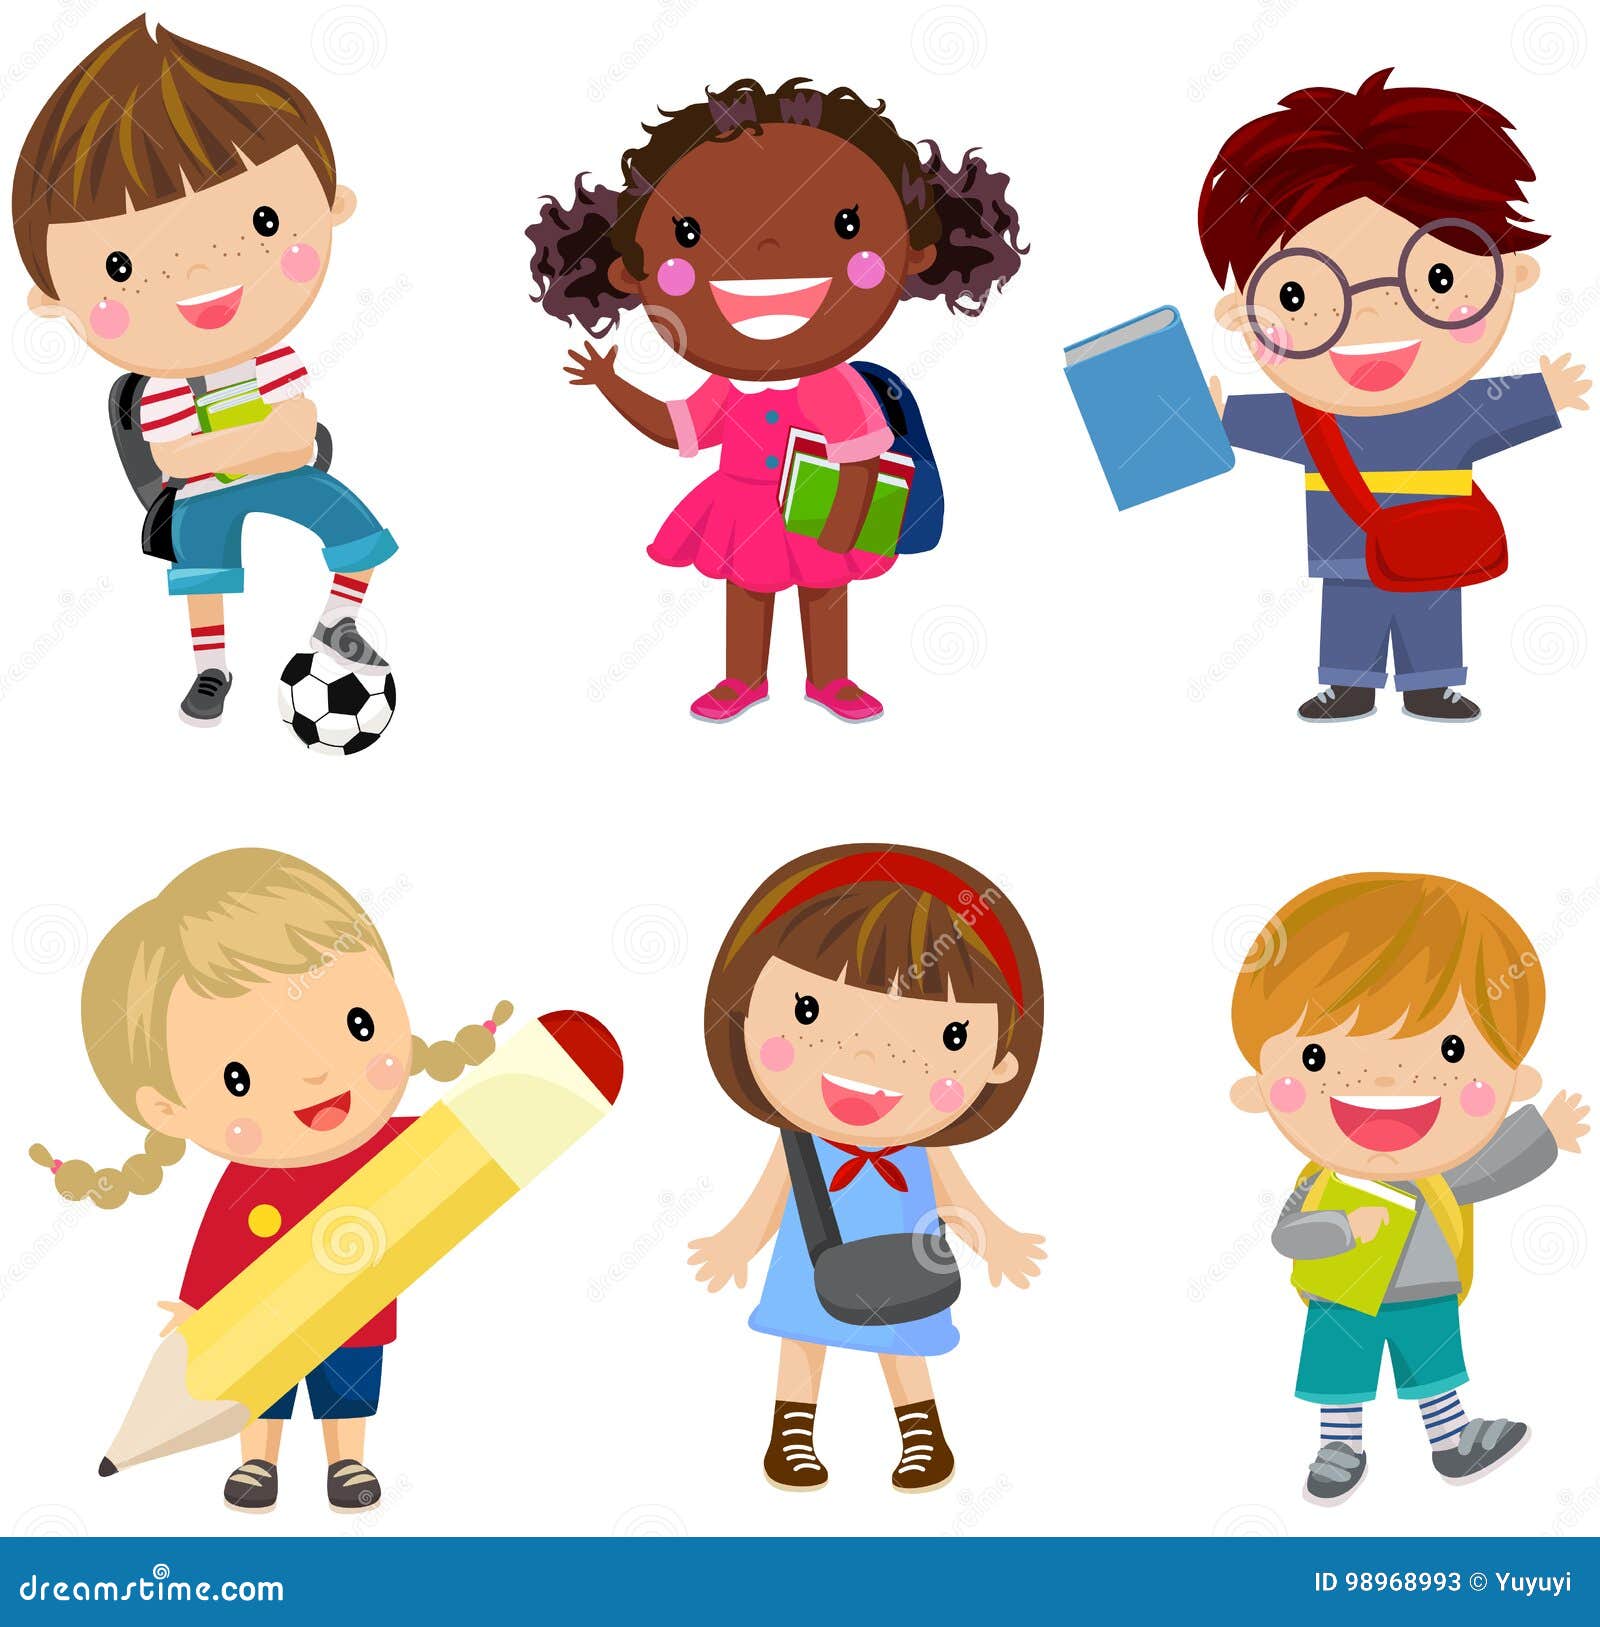 Pupils boys and girls stock vector. Illustration of games - 98968993